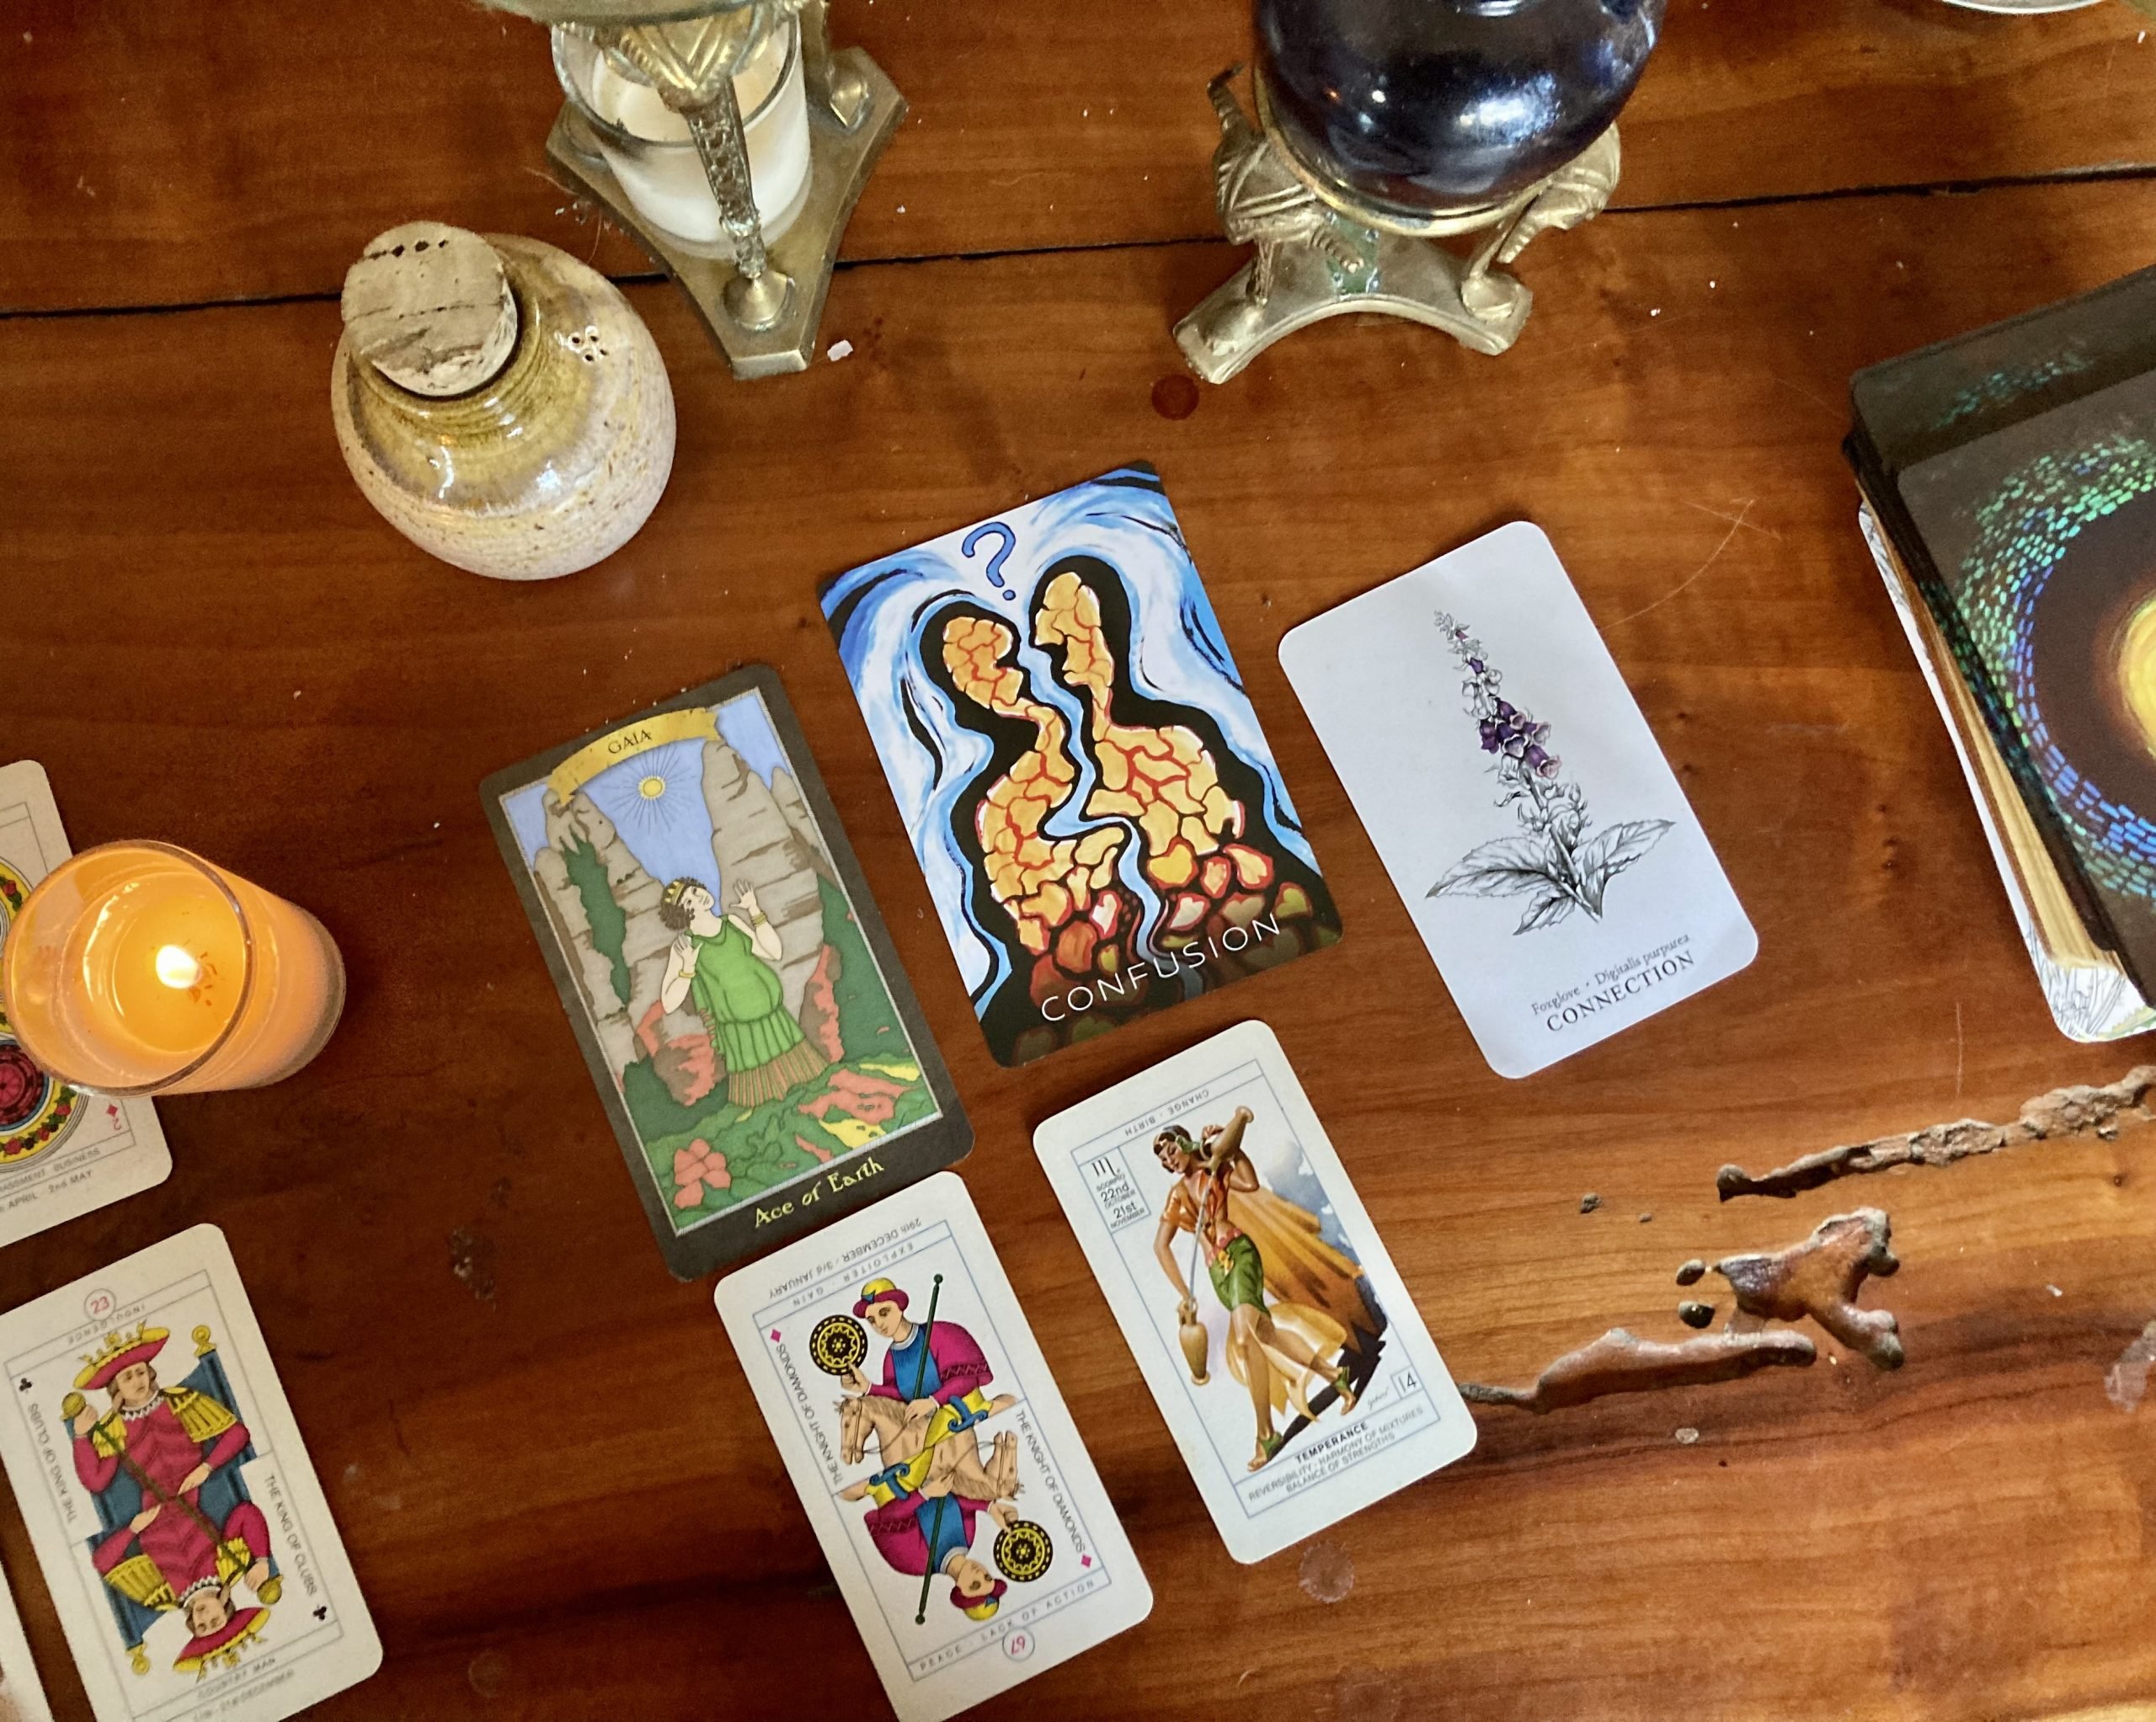 A spread from a several modern tarot decks is visible on a wood table with jars and candles nearby. The cards have different sizes and art styles. Visible are the king of clubs, the knight of diamonds, the ace of earth, temperance, confusion, and connection. The rainbow mosaic pattern of the back of the rest of the cards is also visible.